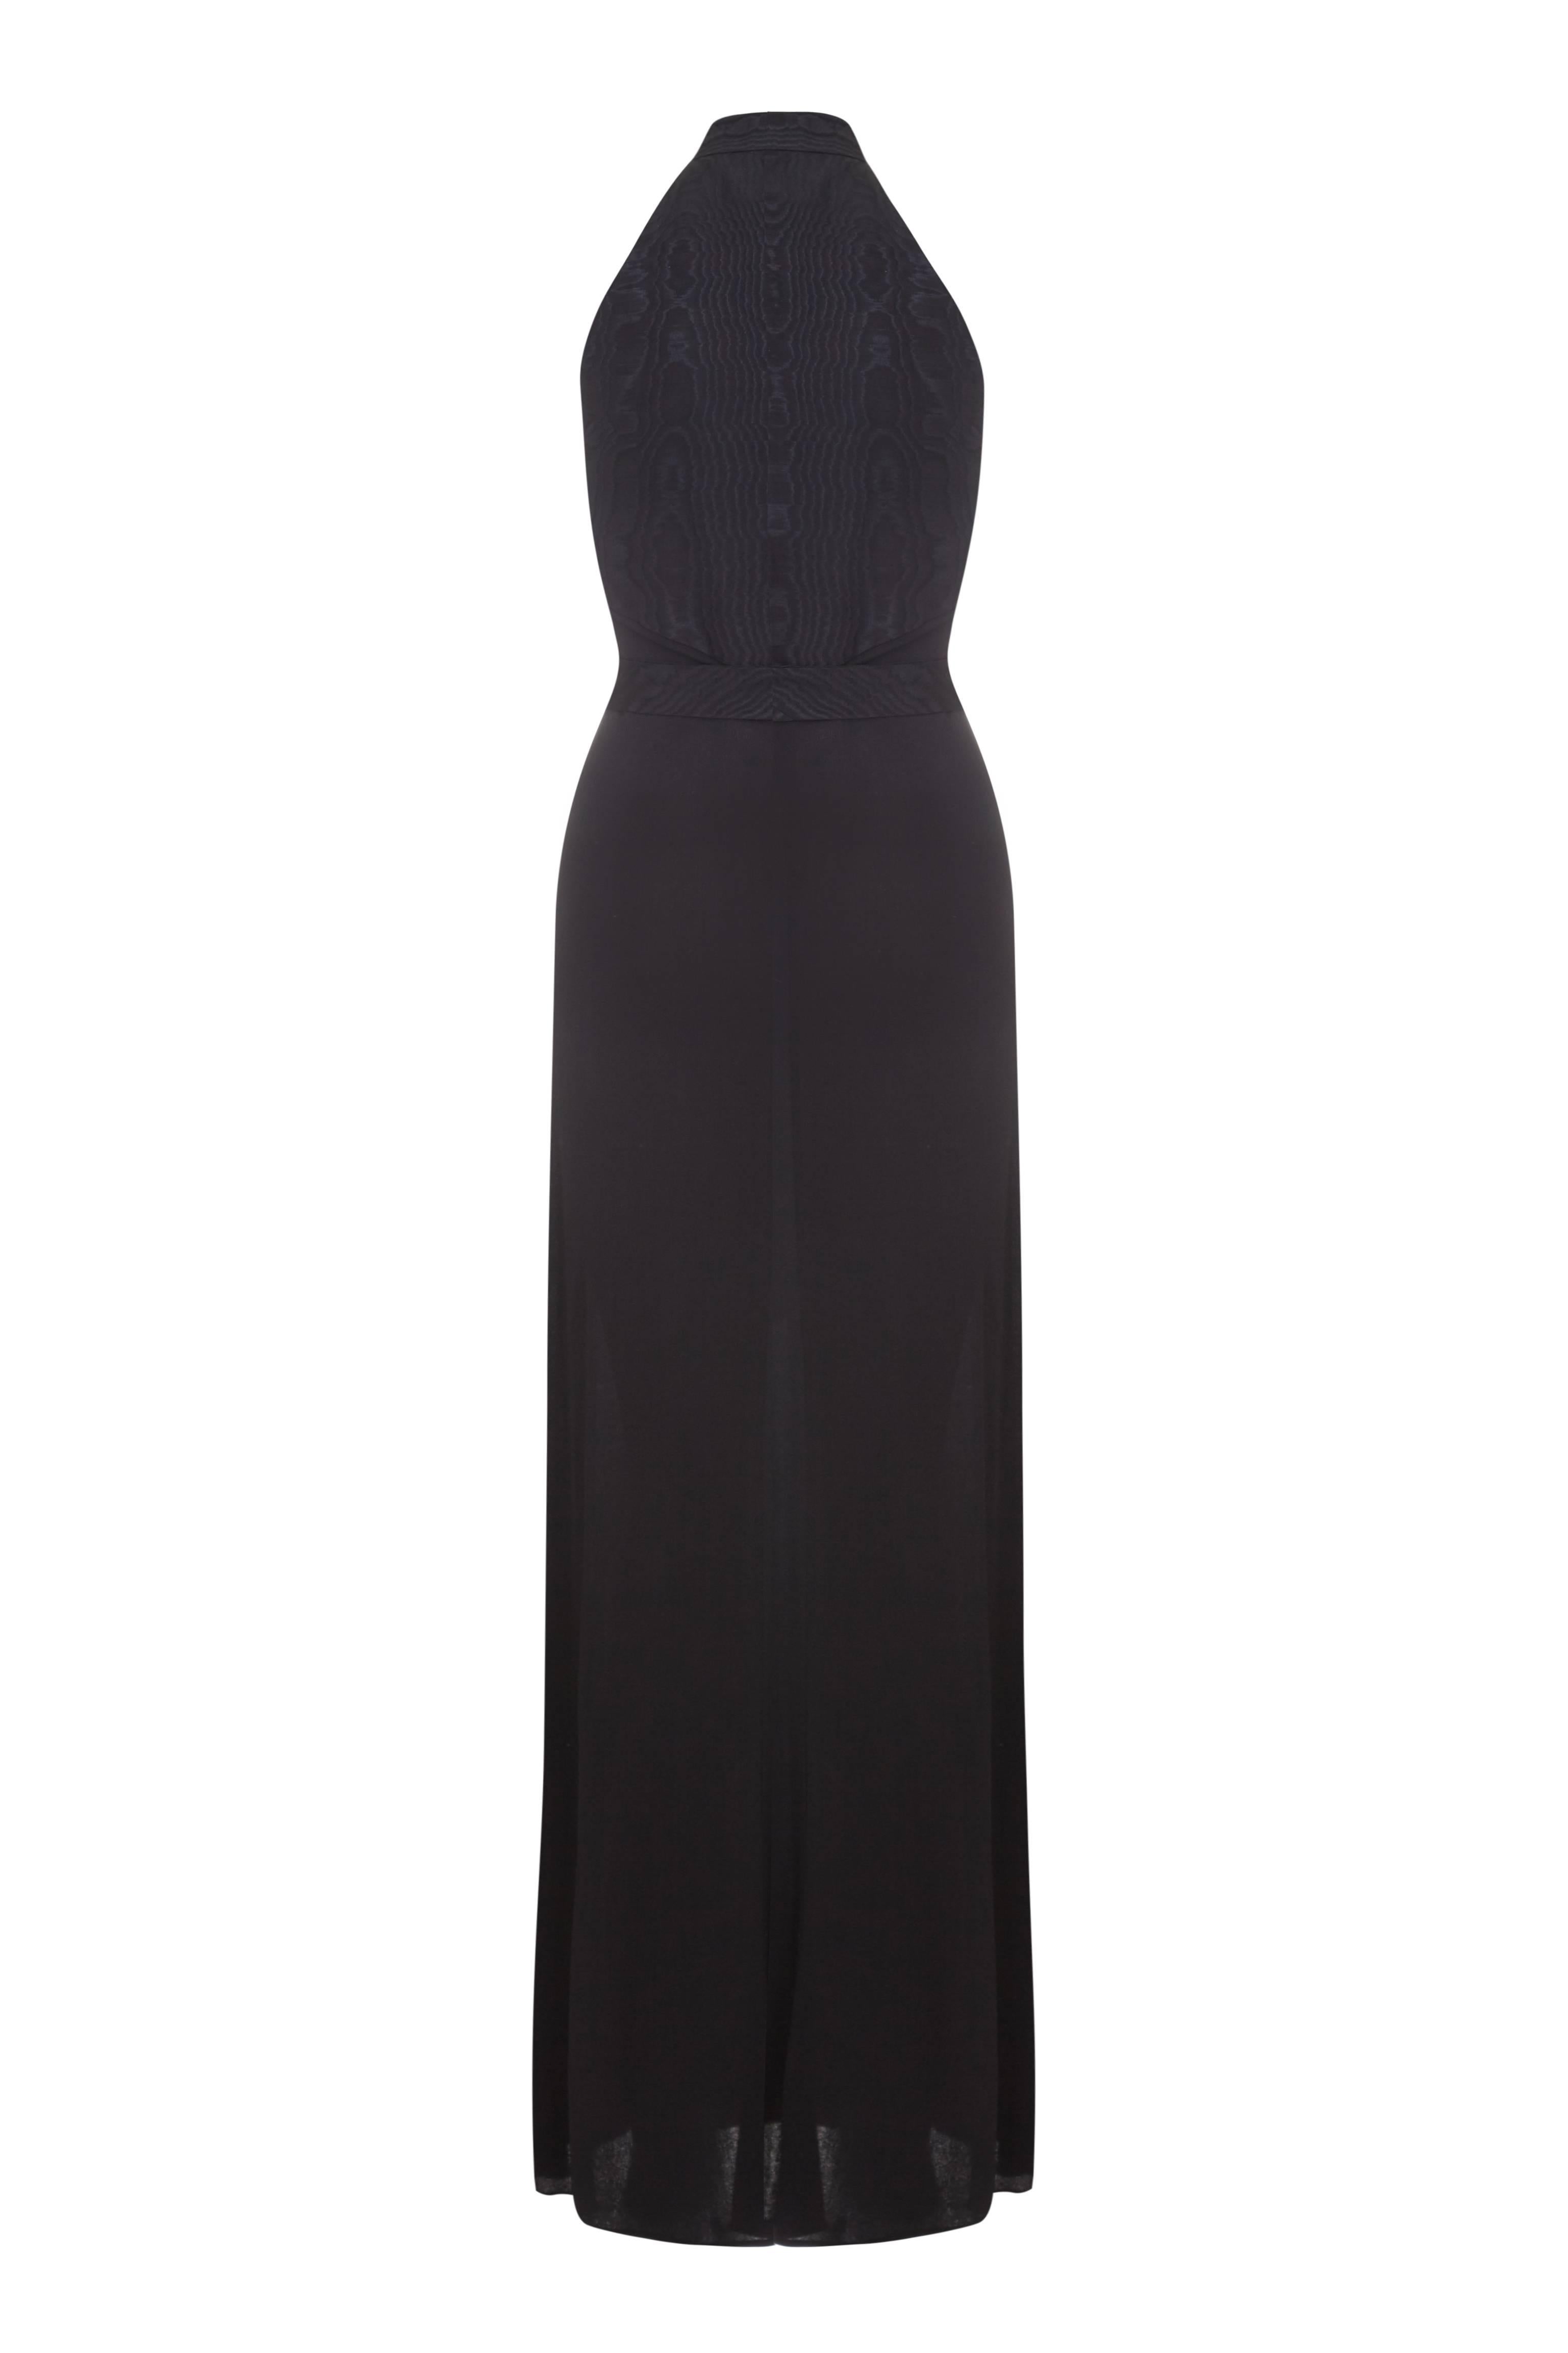 Beautiful vintage 1970s black jersey full length dress with halter neck and moire taffeta edging, belt and back bodice.  This piece is typical of the style of the day with an exaggerated collar, deep V neckline and button fastening down the front. 